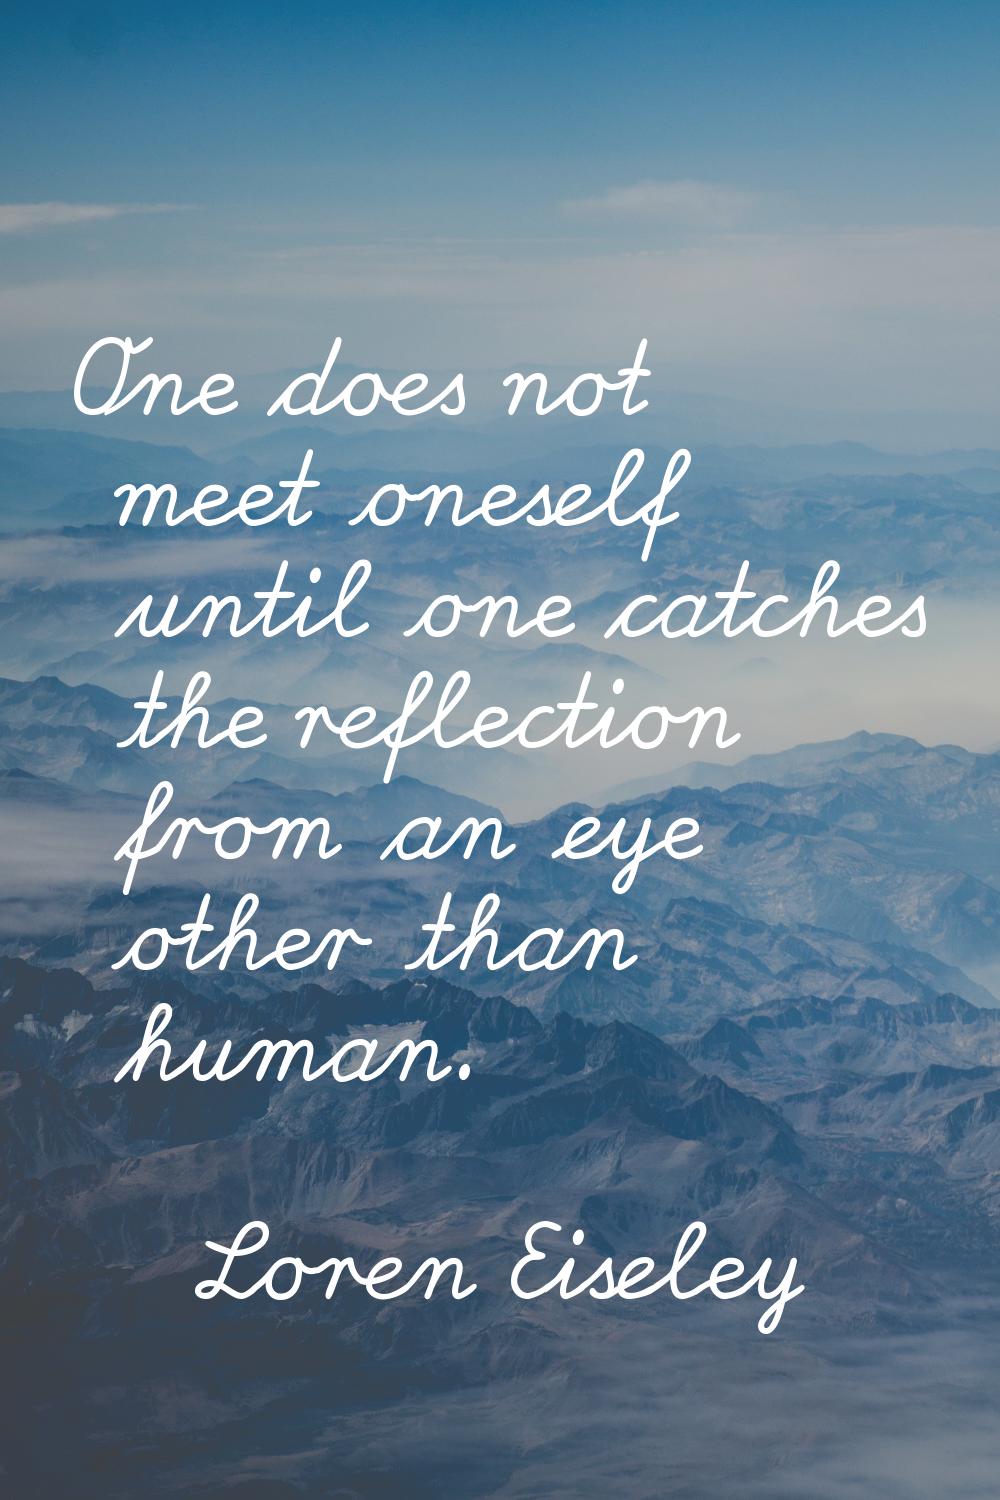 One does not meet oneself until one catches the reflection from an eye other than human.